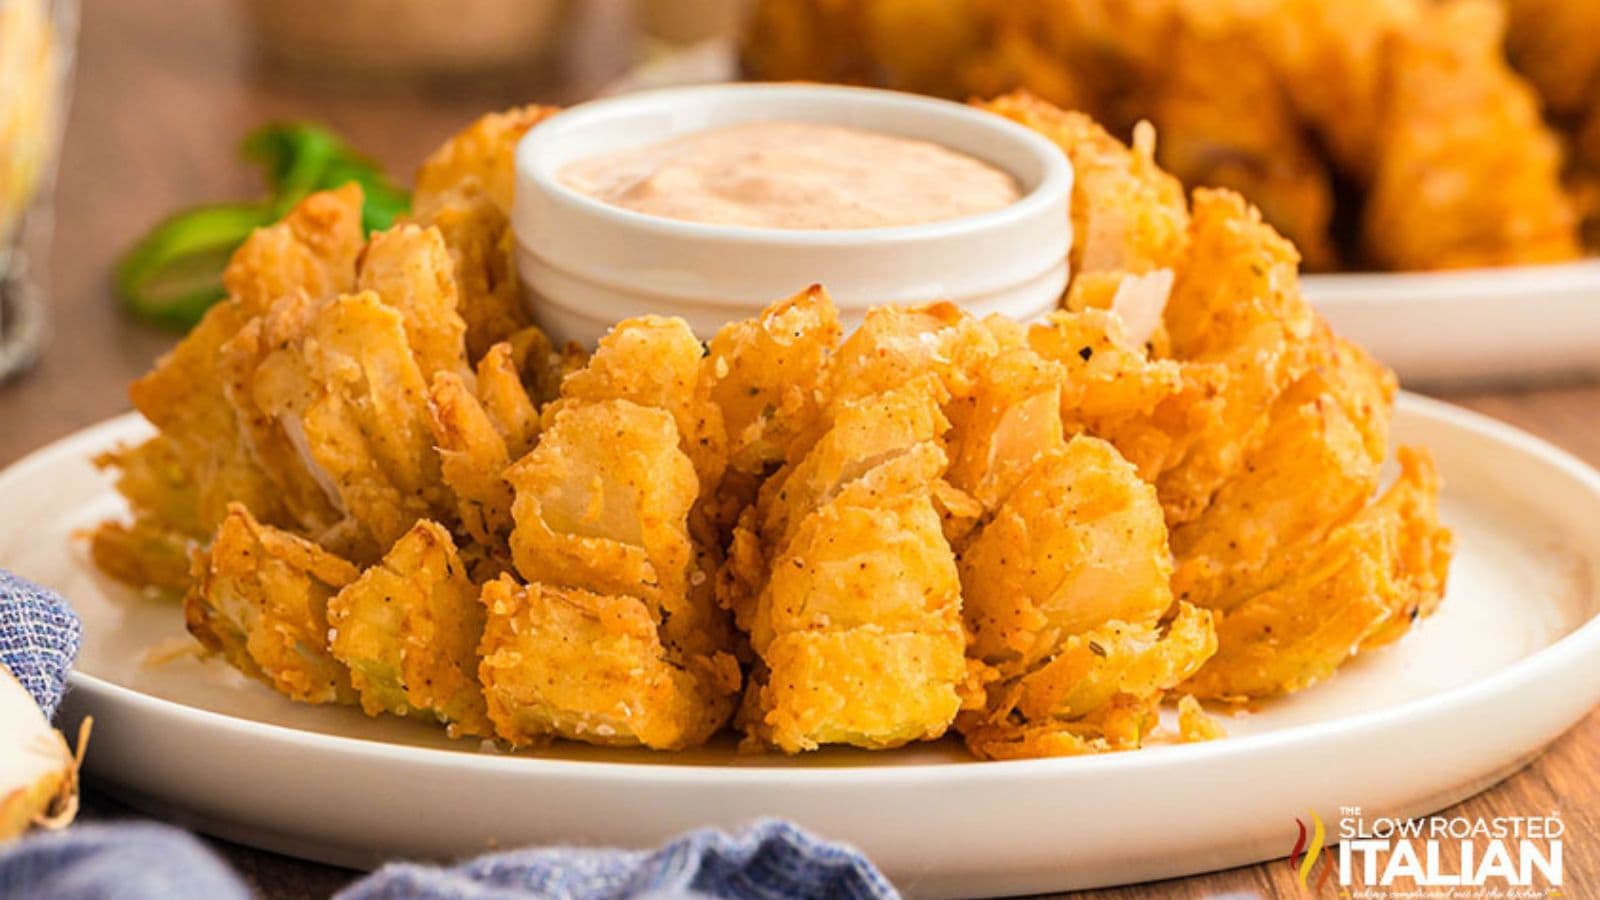 Copycat Blooming Onion recipe by The Slow Roasted Italian.